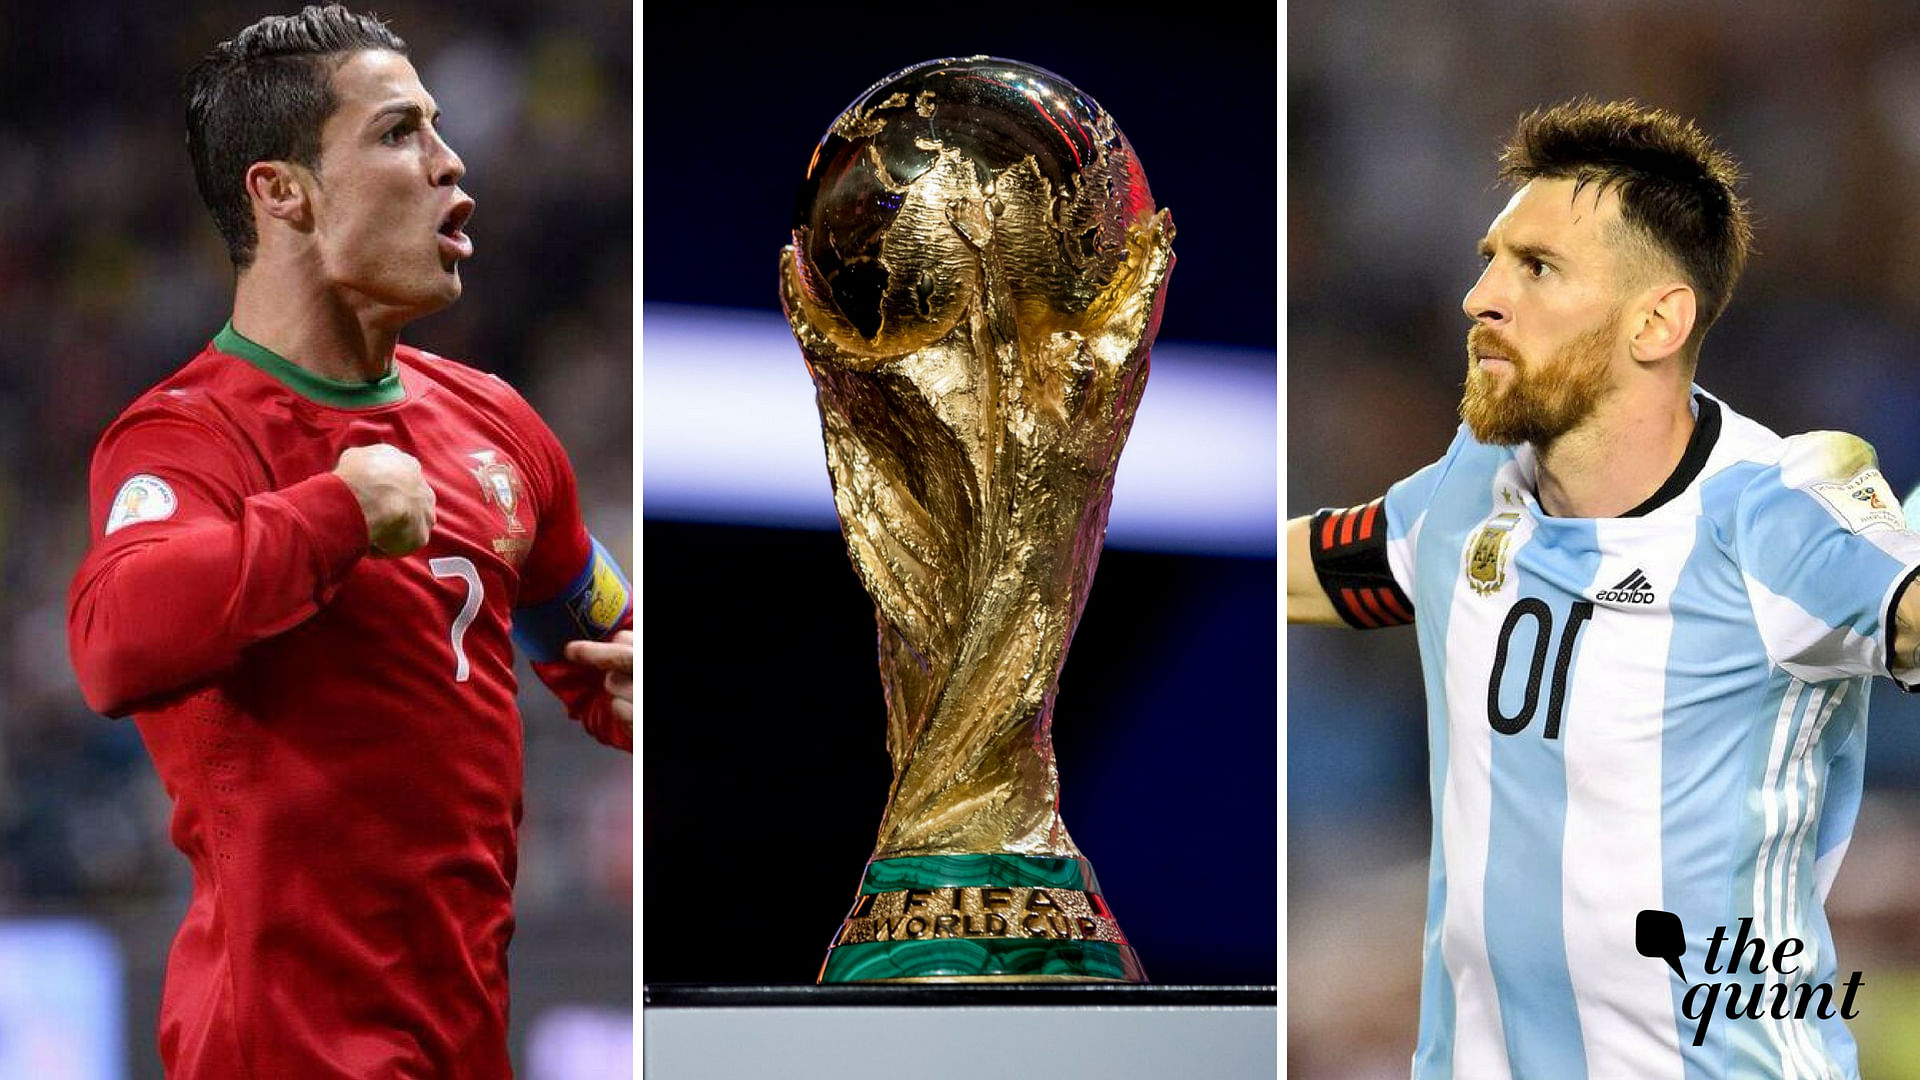 Cristiano Ronaldo (L) and Lionel Messi will look to inspire their teams to win the World Cup trophy this summer.